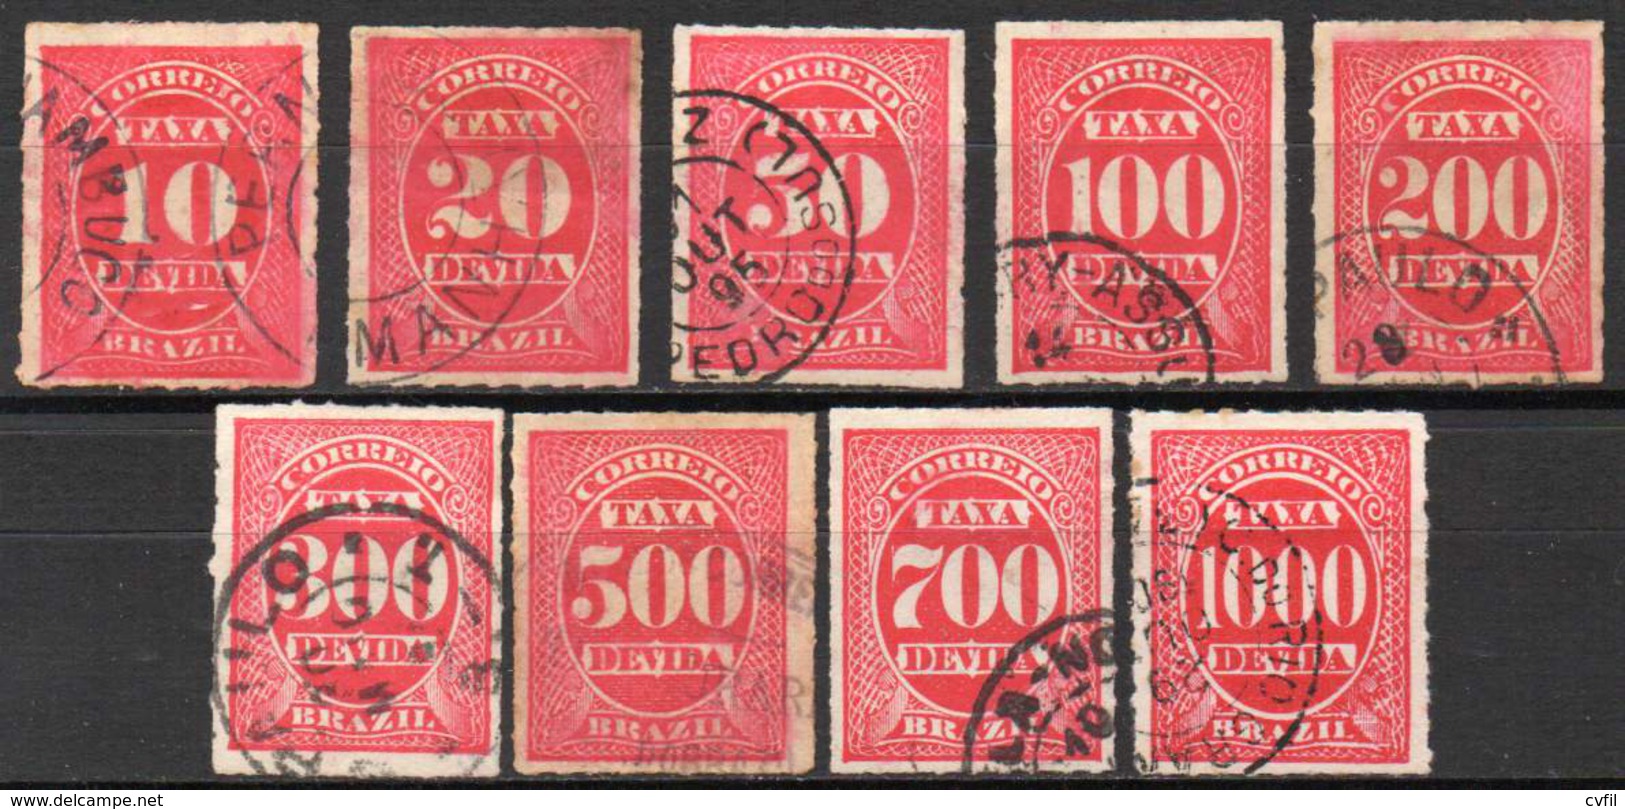 BRASIL 1890 - TAXA DEVIDA. The First Set To Be Used In The Federal District, Very Fine Used (9) - Postage Due